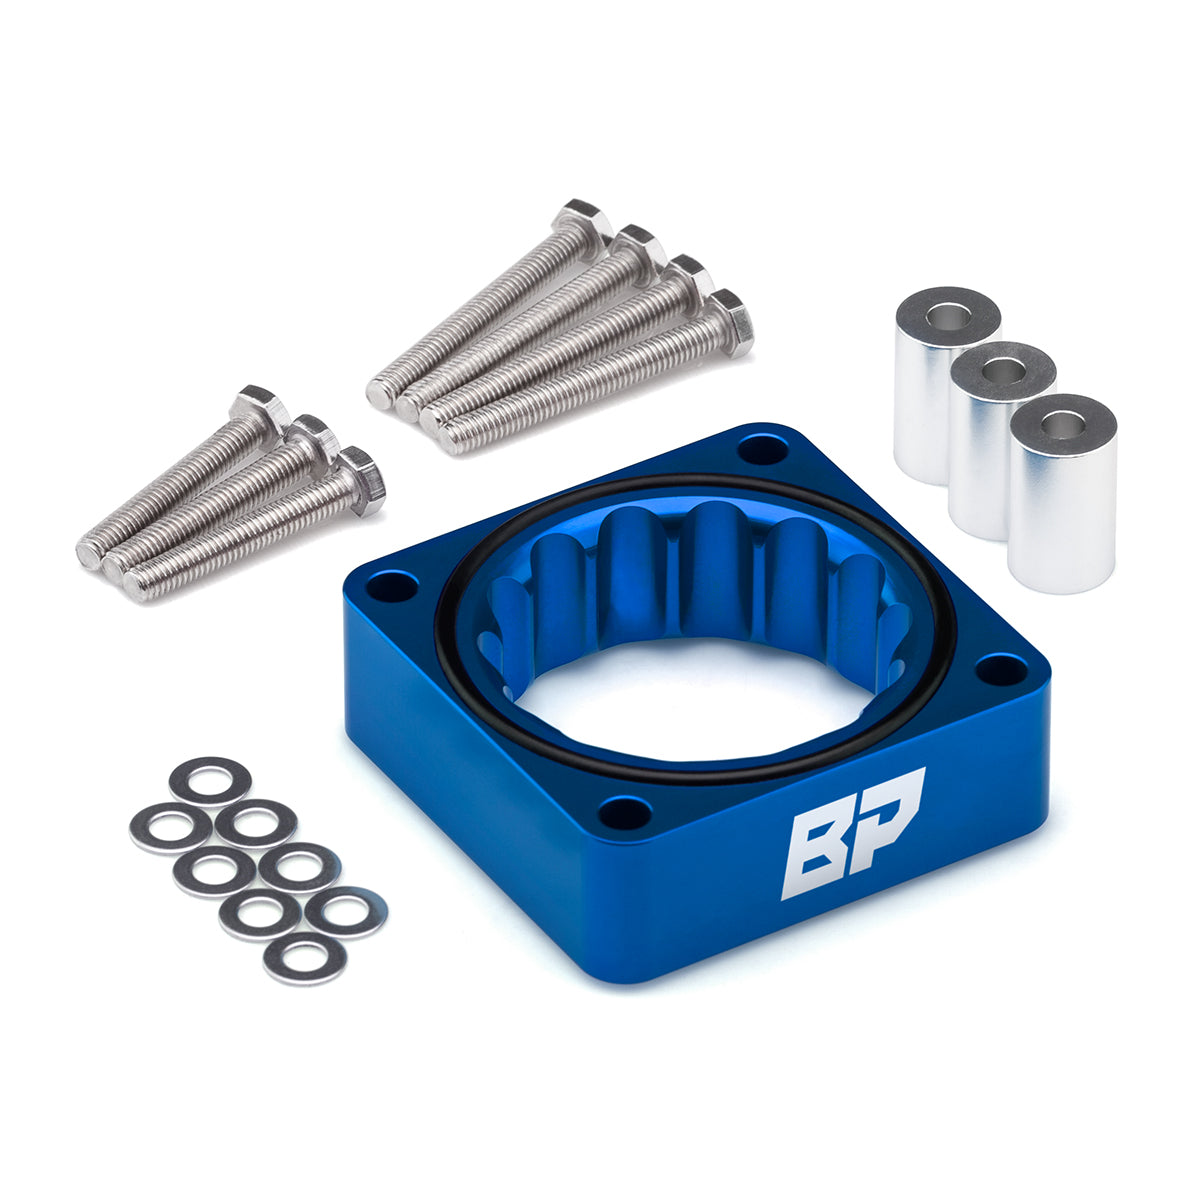 1991-1995 Jeep Wrangler YJ 2.5L and 4.0L Flat Throttle Body Spacer-Throttle Body Spacer-Blackpathinc